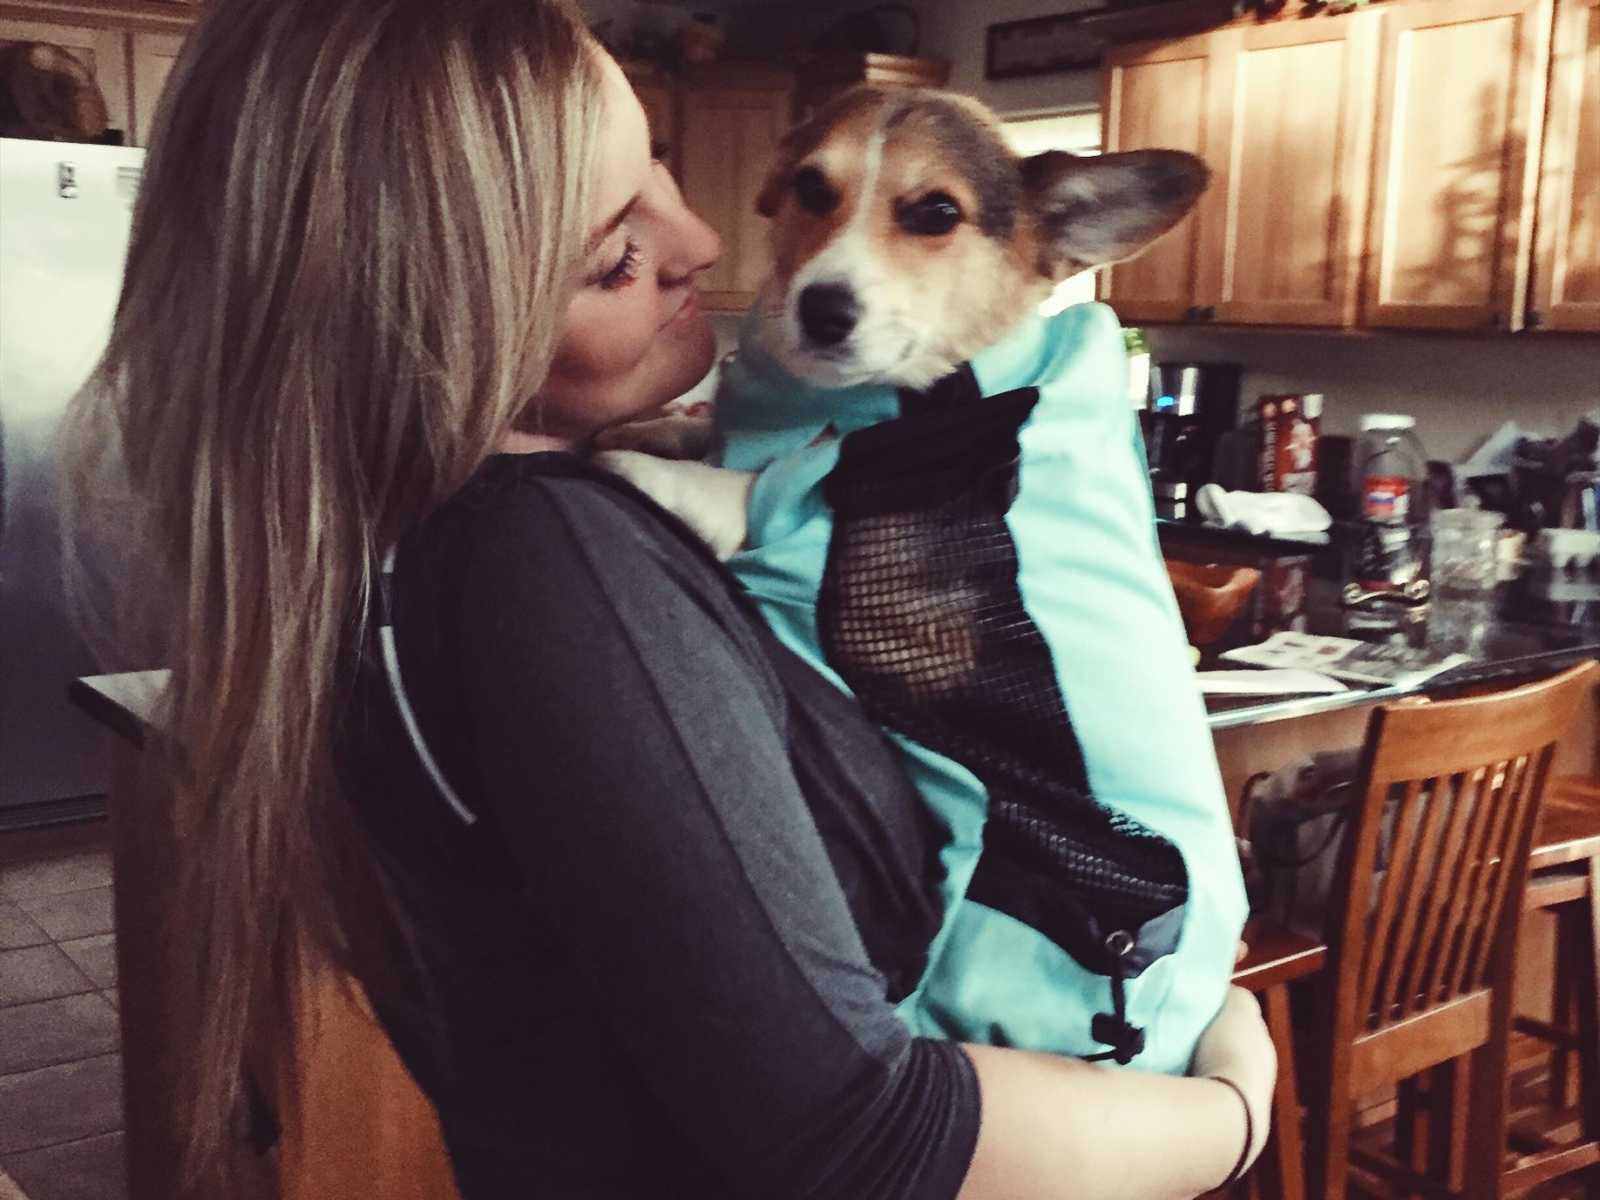 blonde woman holds dog in blue drawstring bag to her chest in kitchen